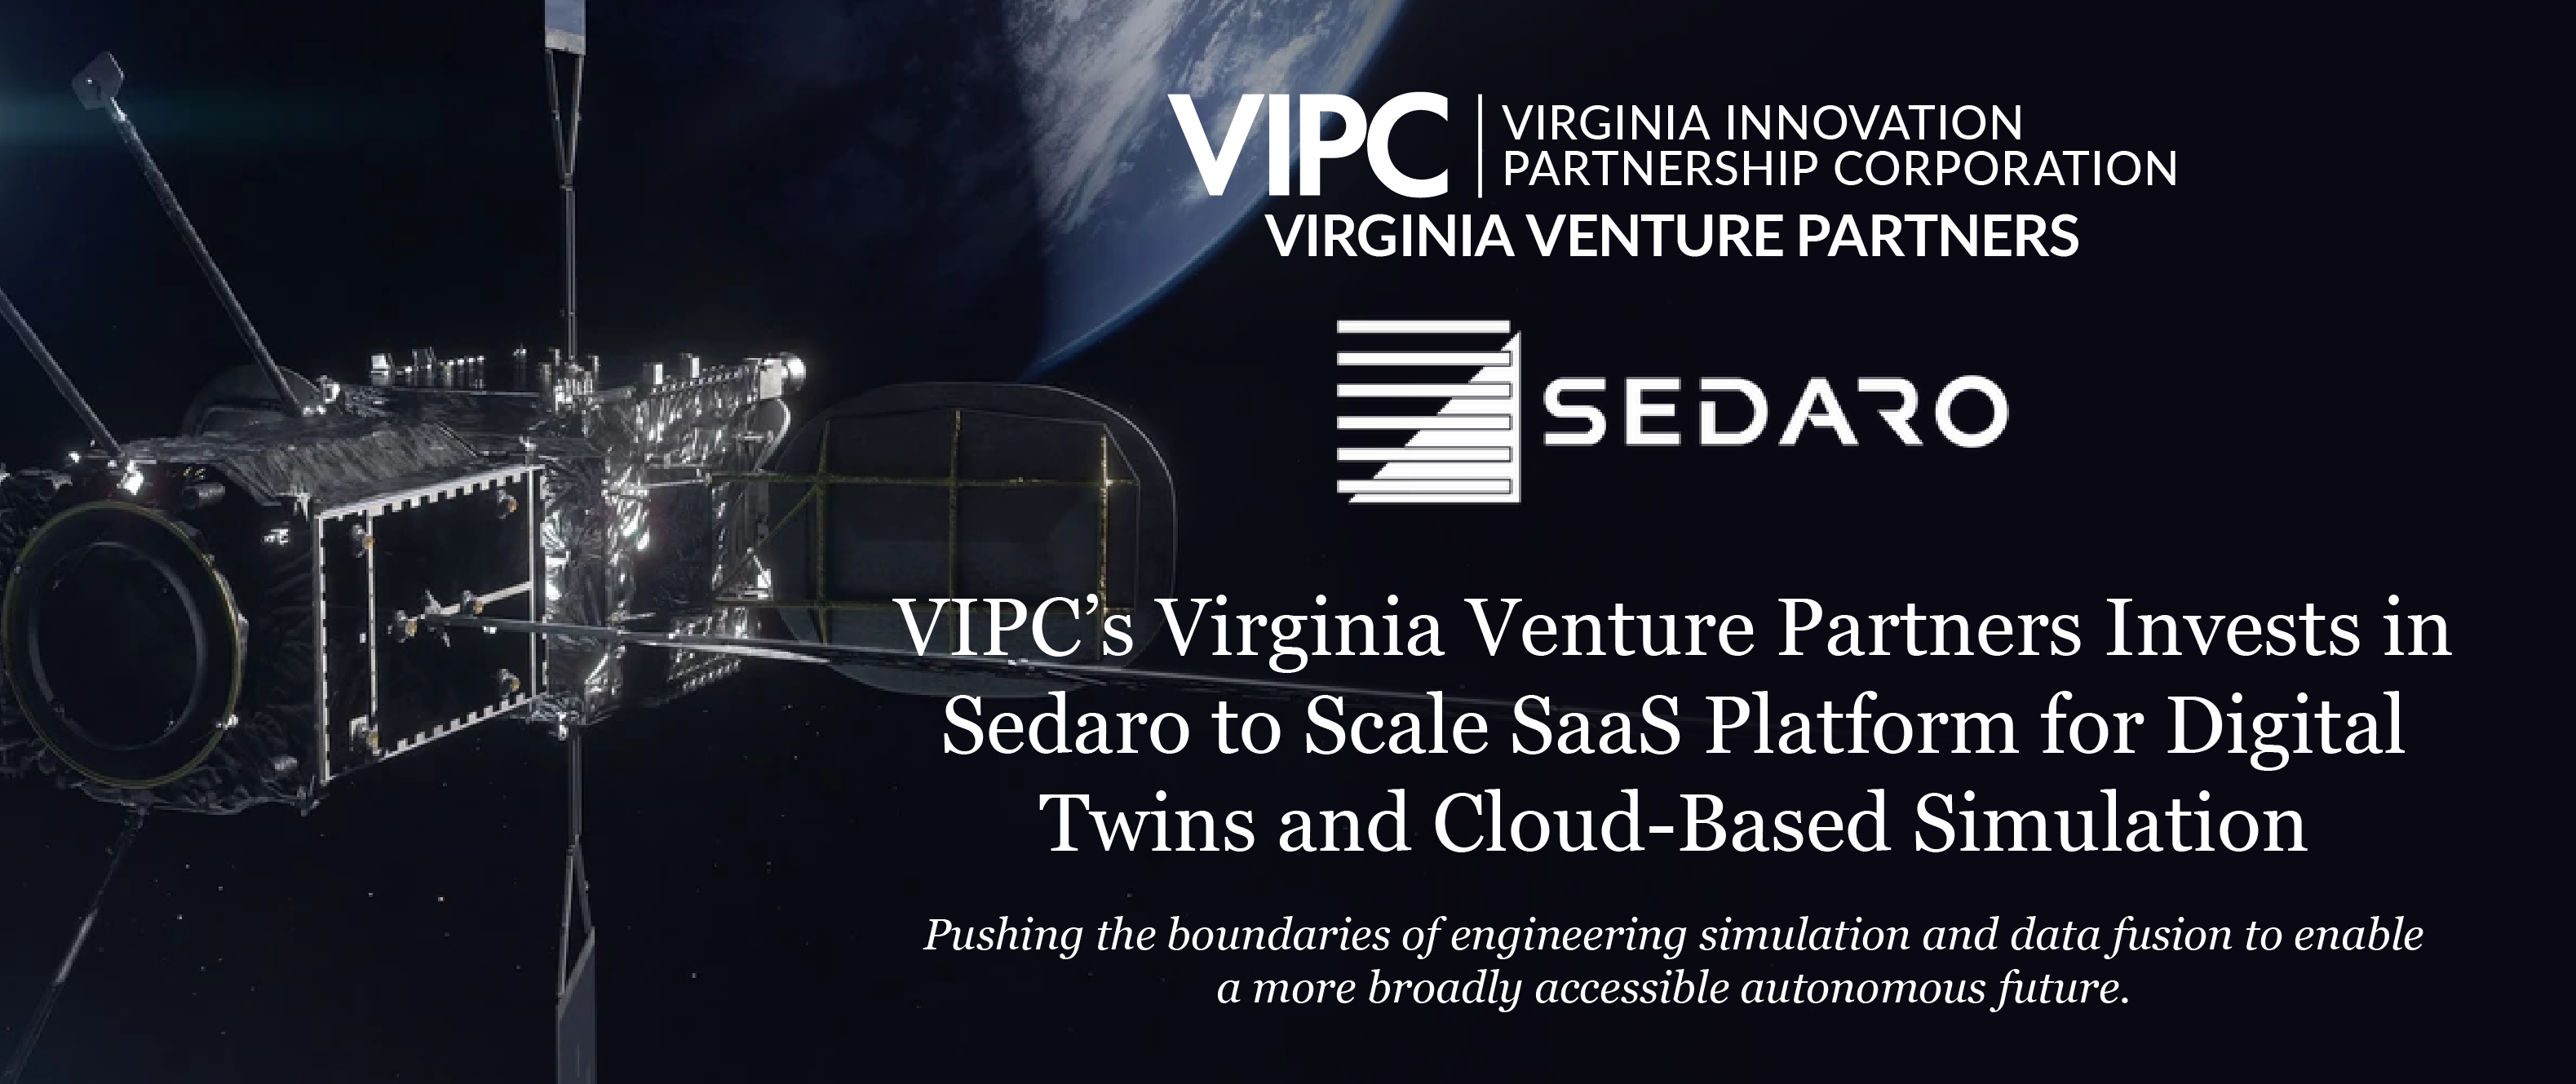 VIPC’s Virginia Venture Partners Invests in Sedaro to Scale SaaS Platform for Digital Twins and Cloud-Based Simulation